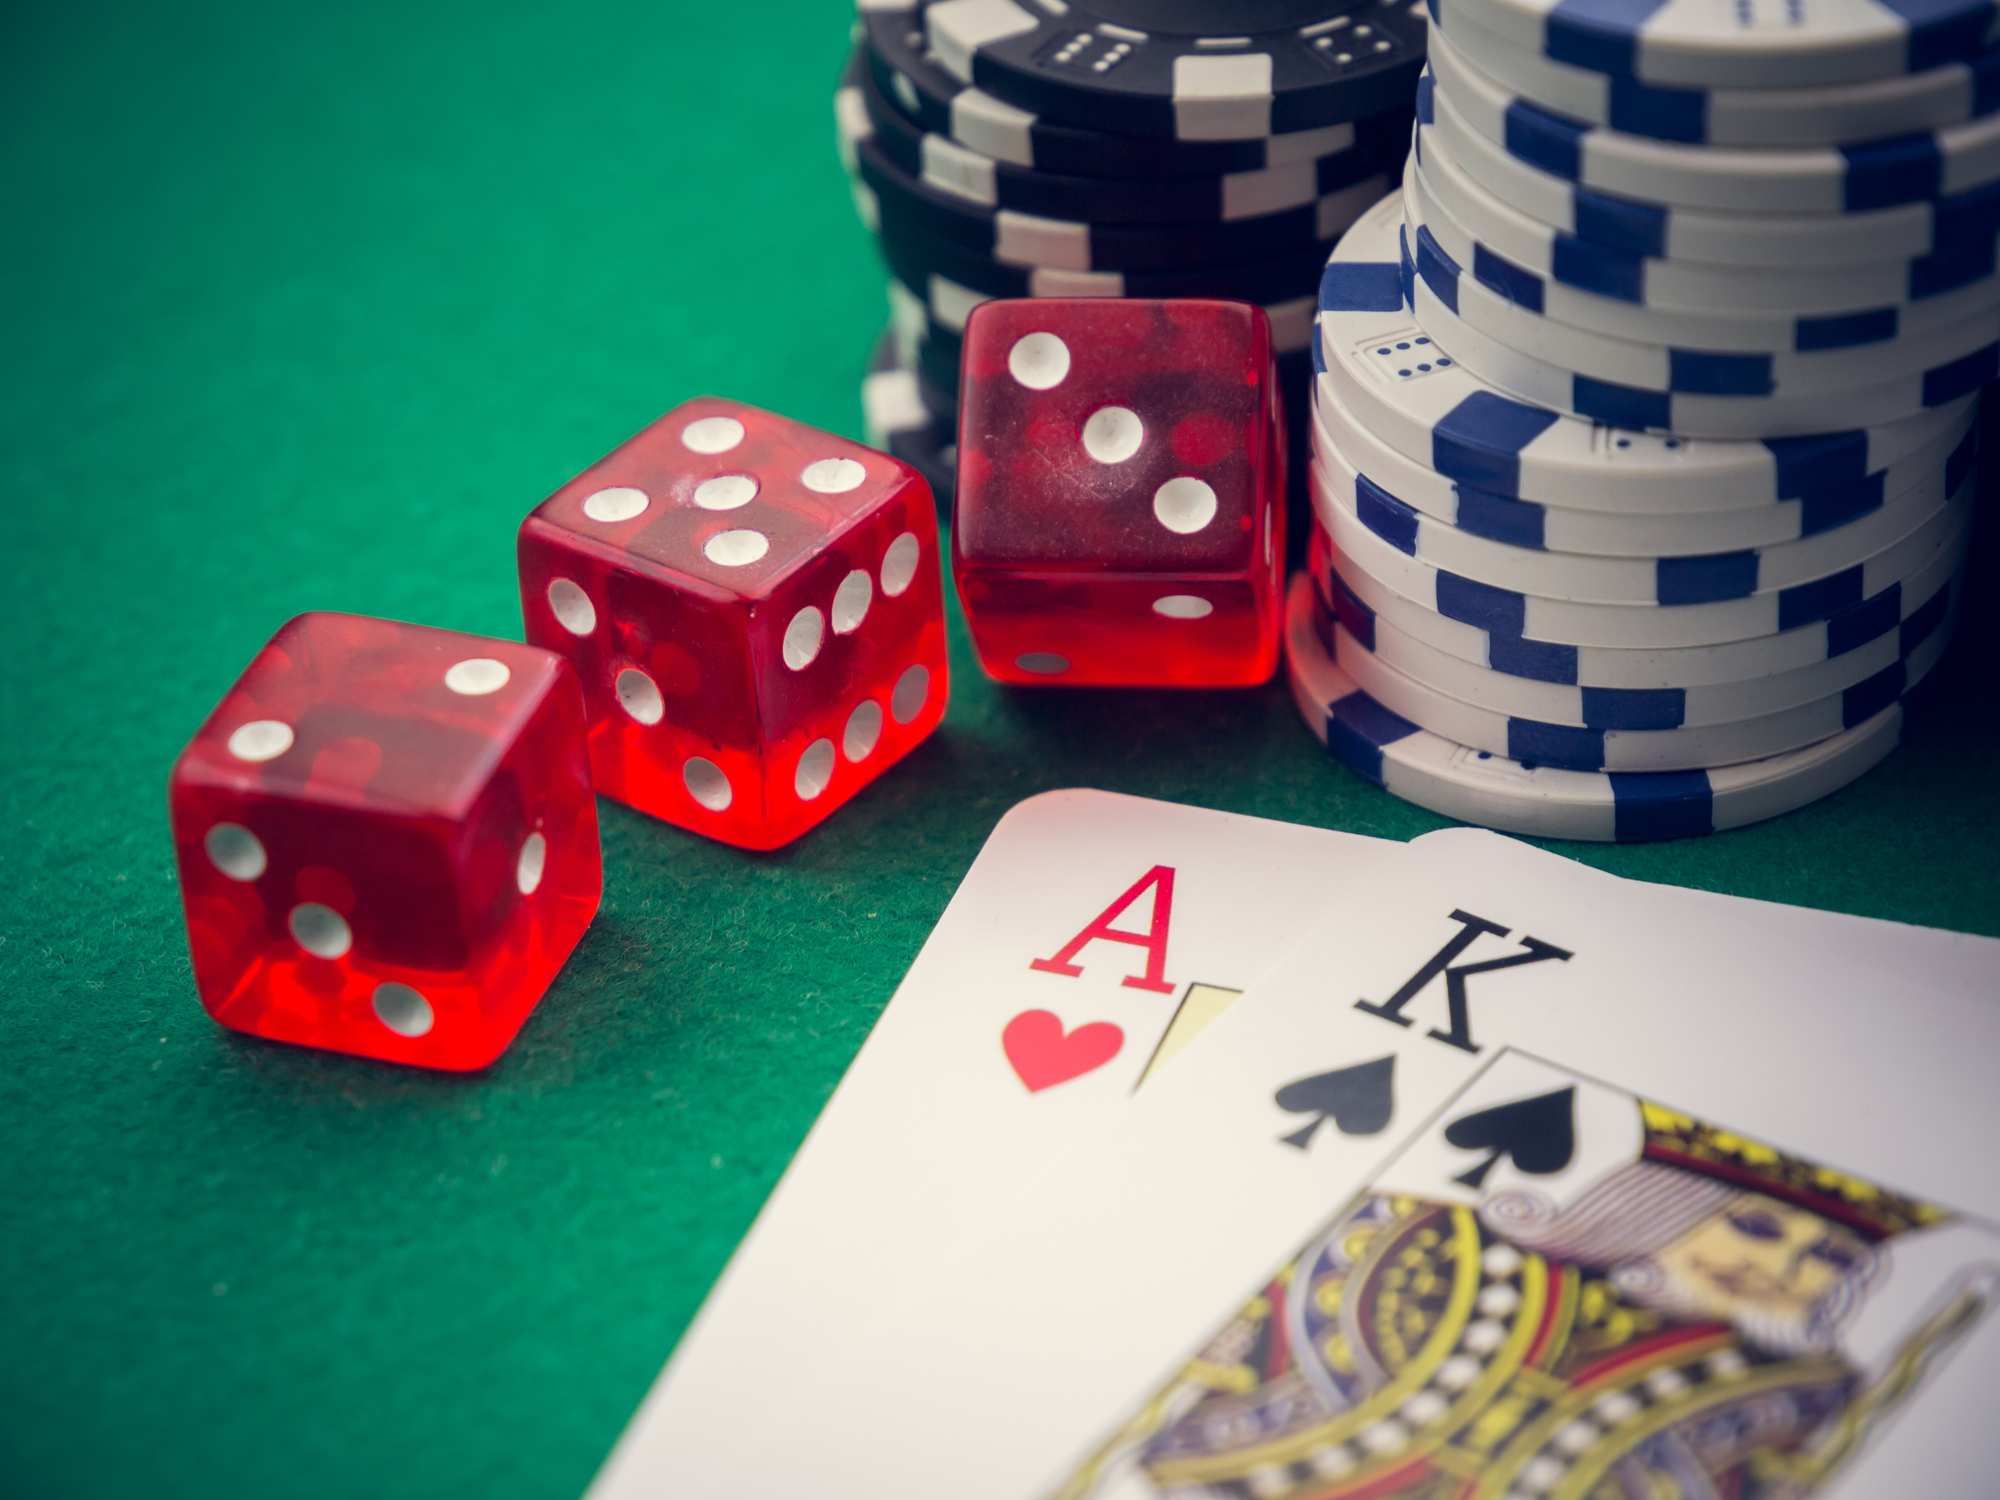 Poker lessons and the 20-minute neighbourhood